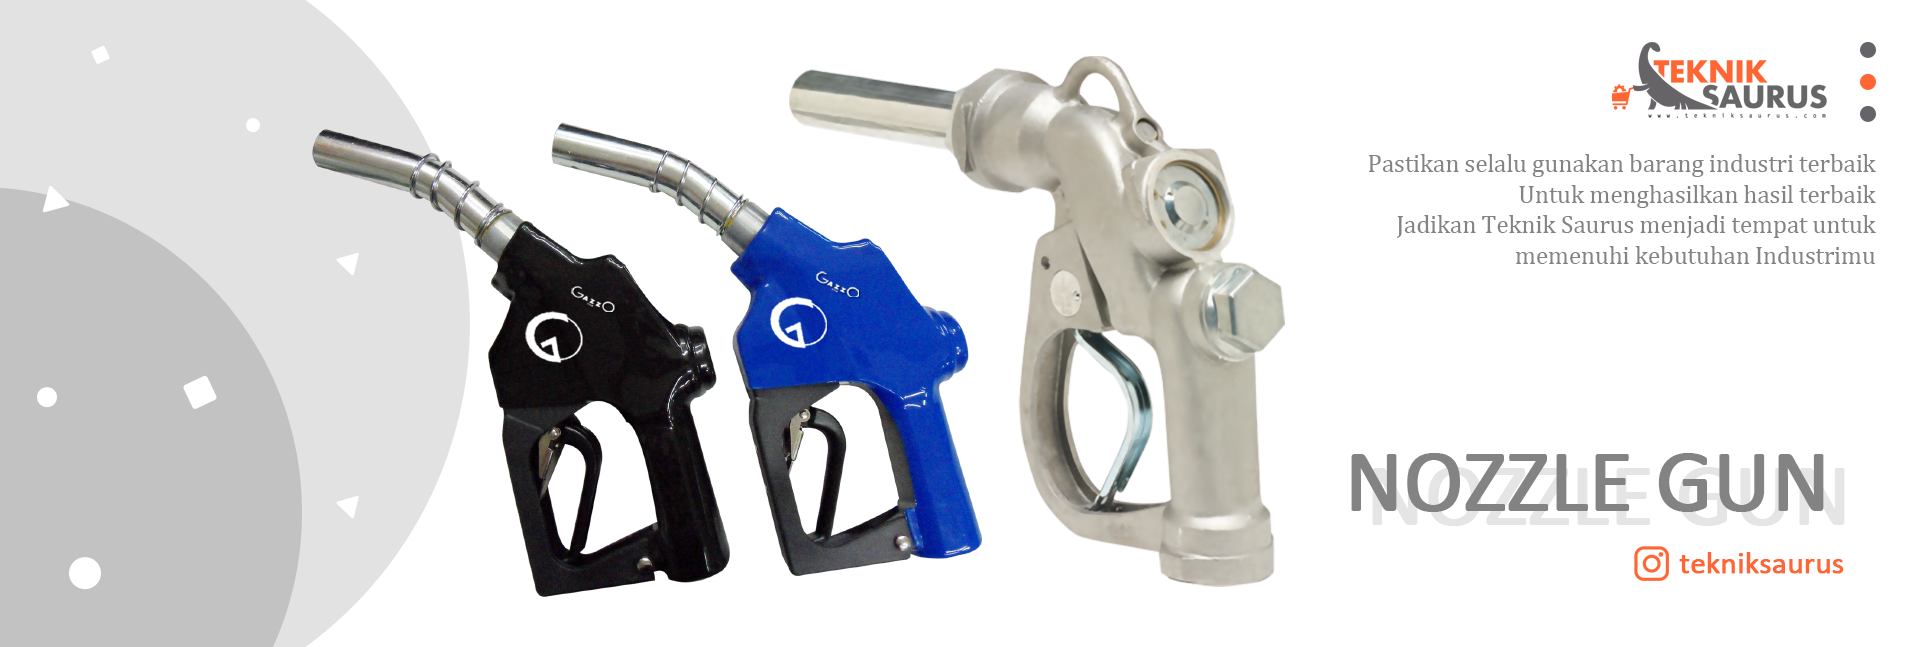 banner product category Nozzle Gun